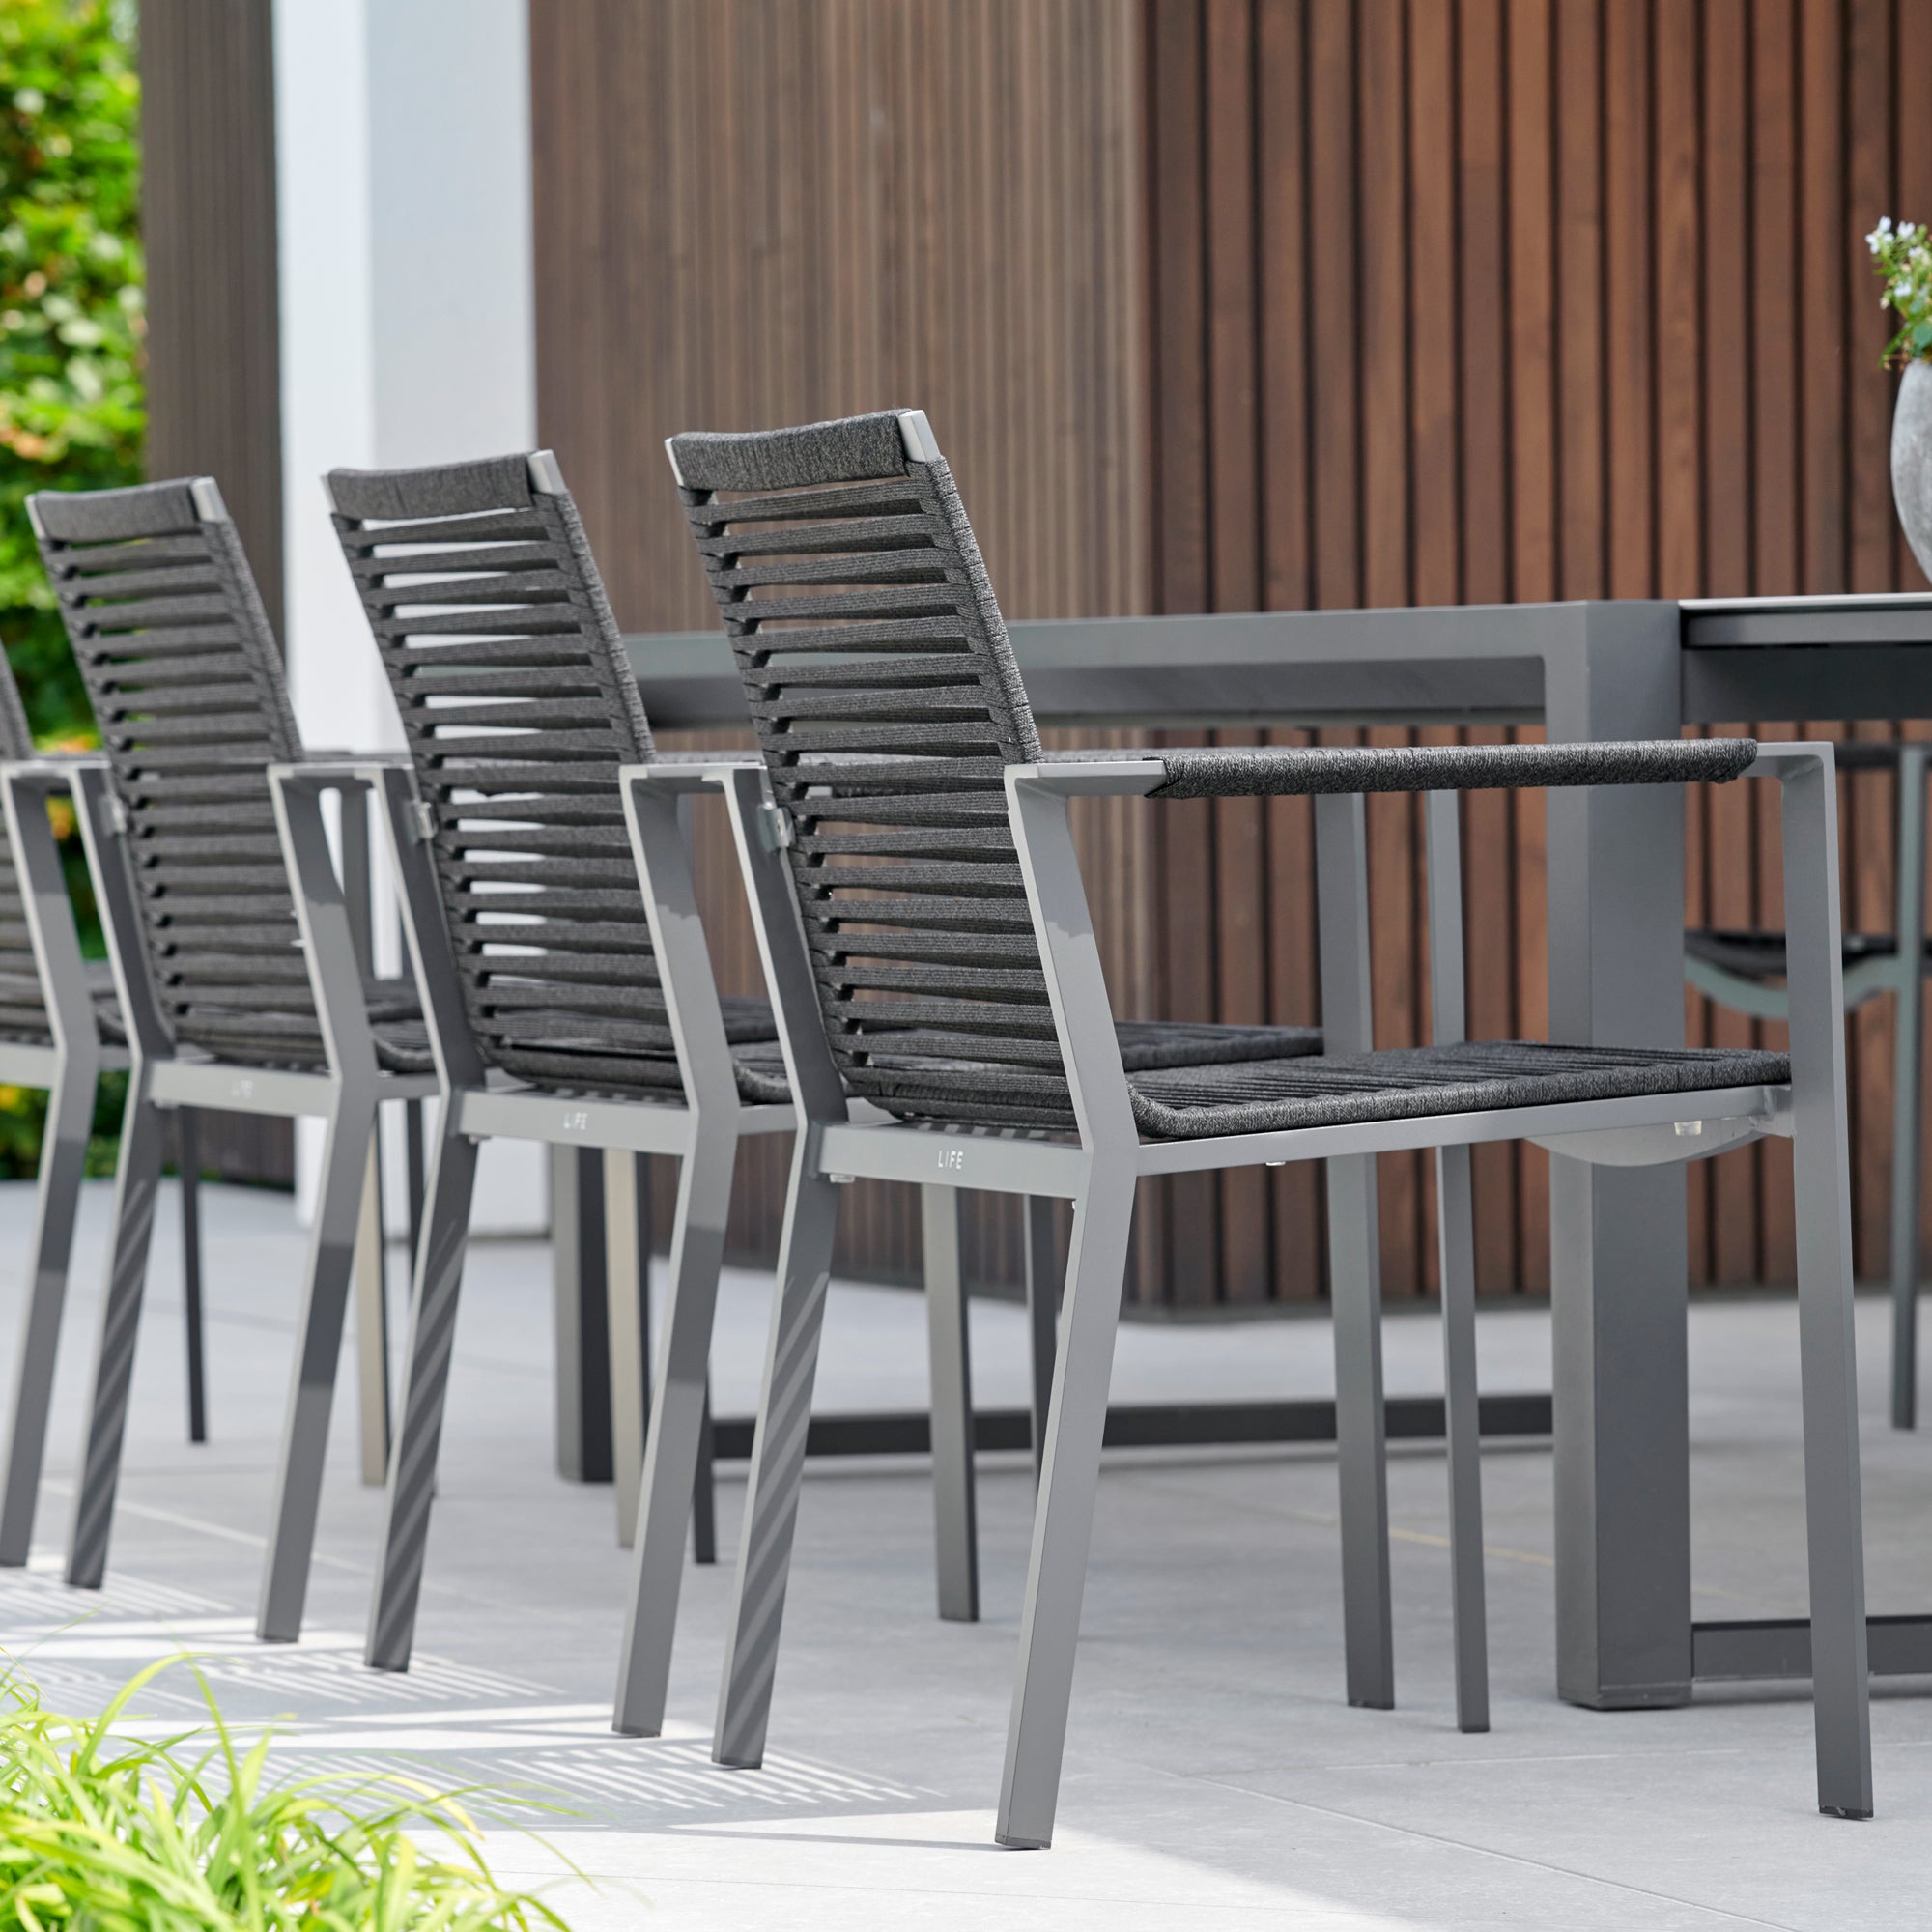 Dining Chairs - Porto modern aluminum and rope stackable dining chairs